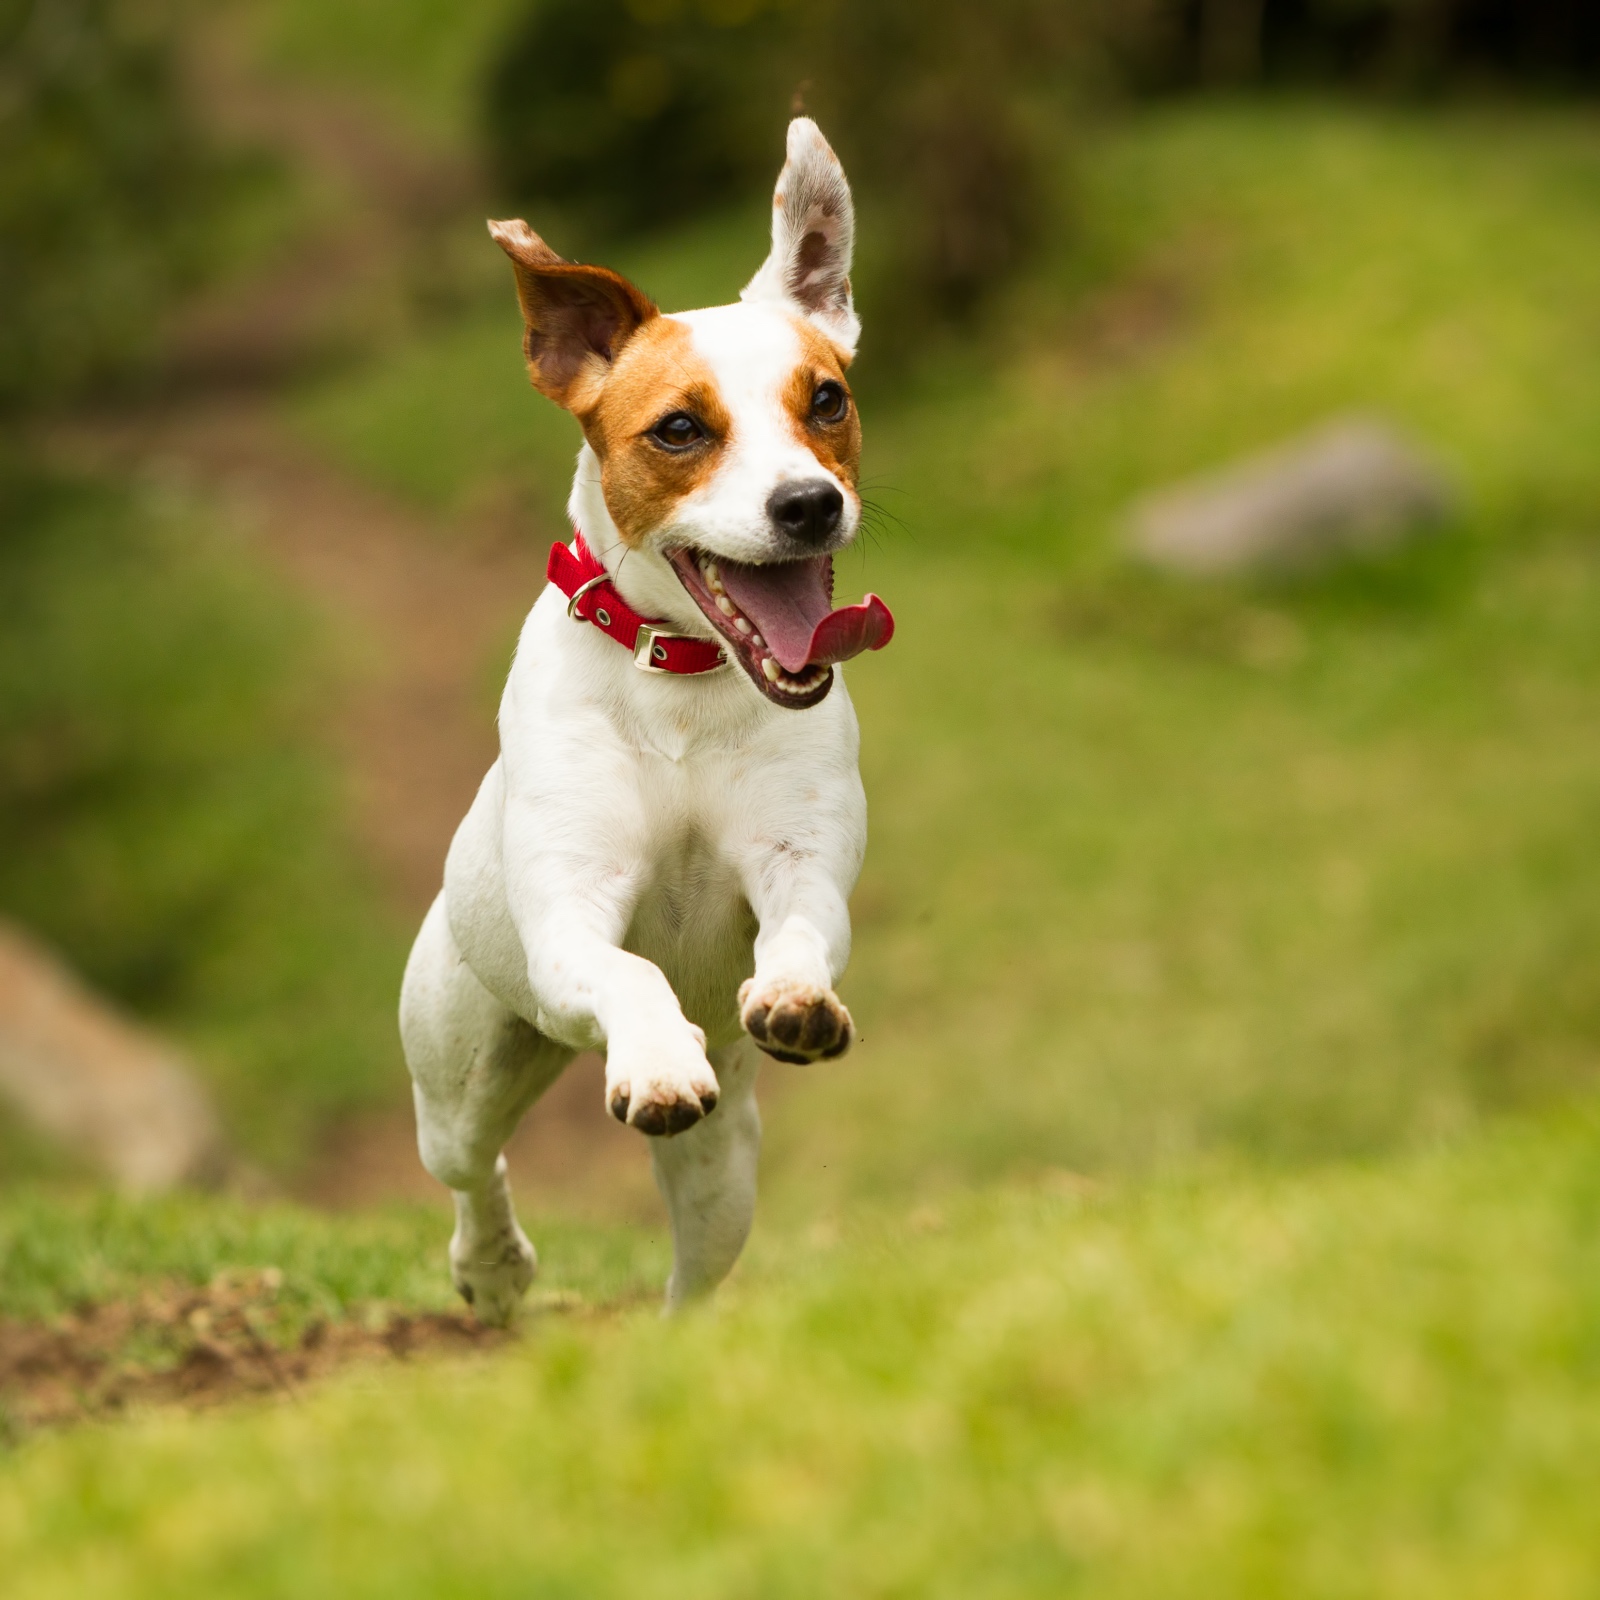 Terrier jumping in the air with tongue hanging out